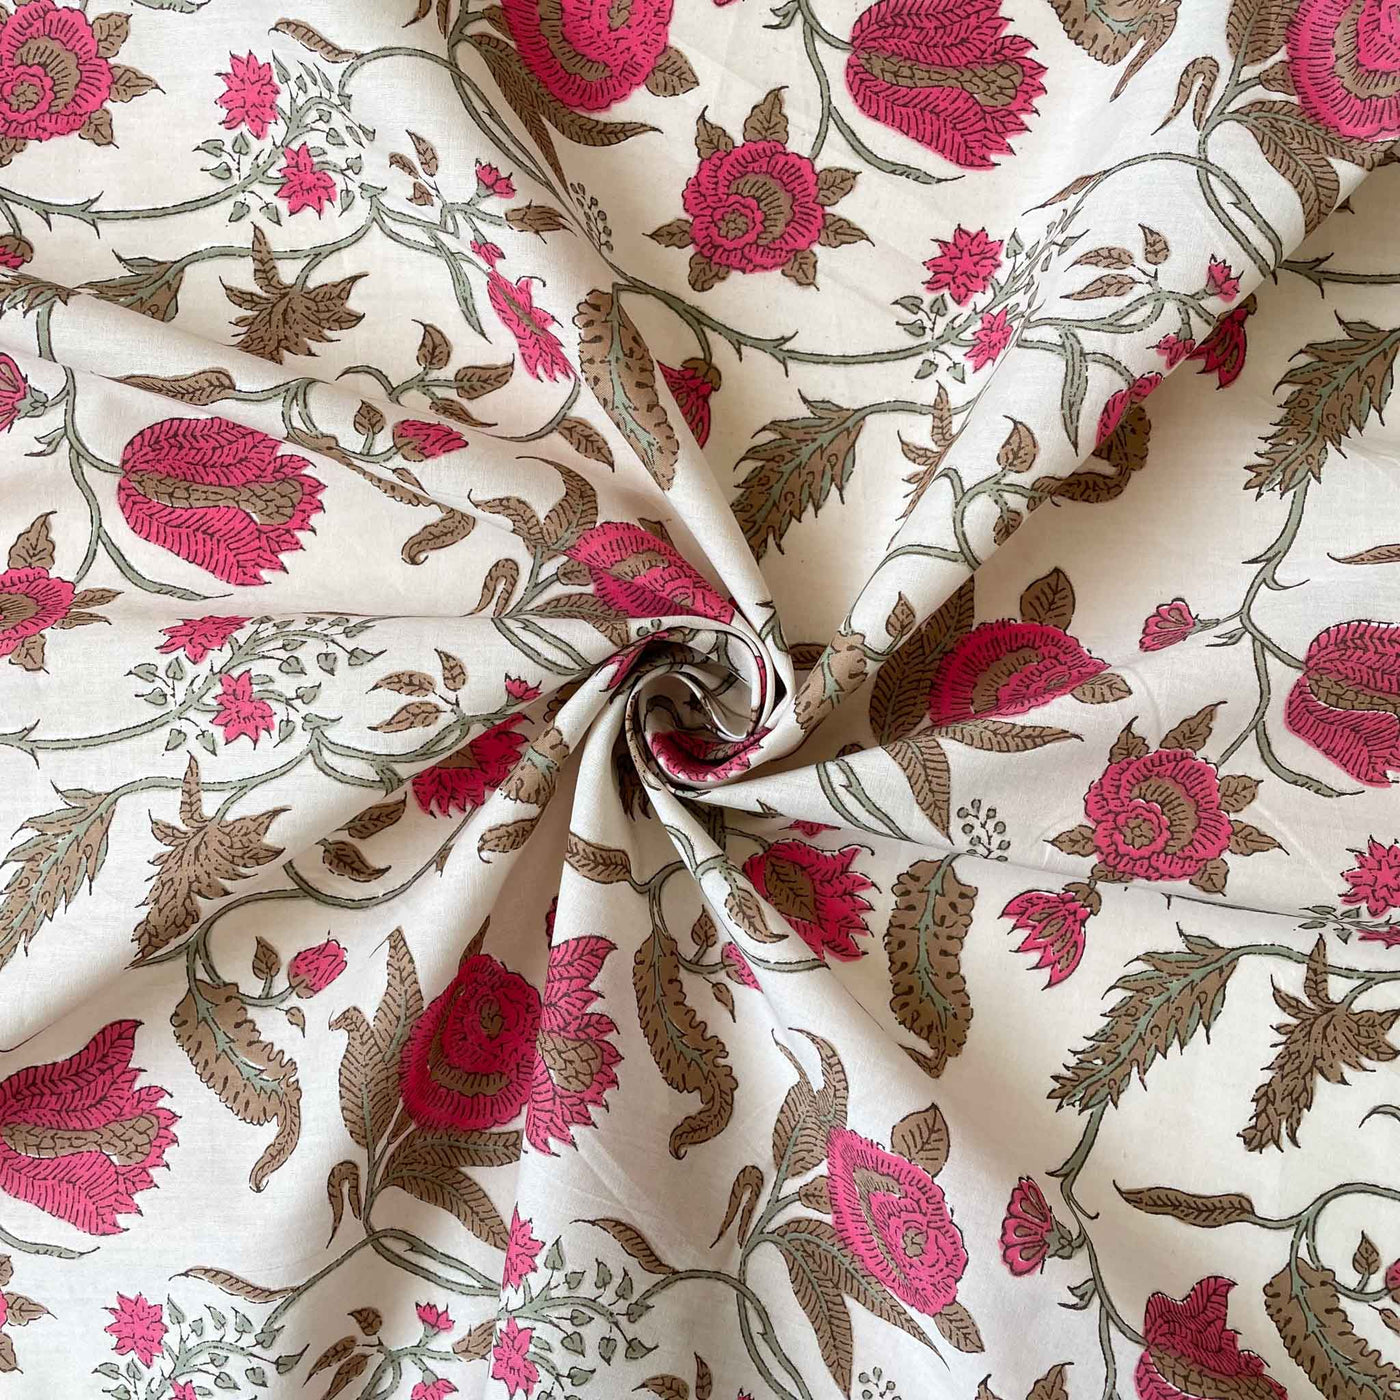 Fabric Pandit Cut Piece (Cut Piece) Maroon and Cream Wild Roses & Poppies Screen Printed Pure Cotton Fabric (Width 43 inches)